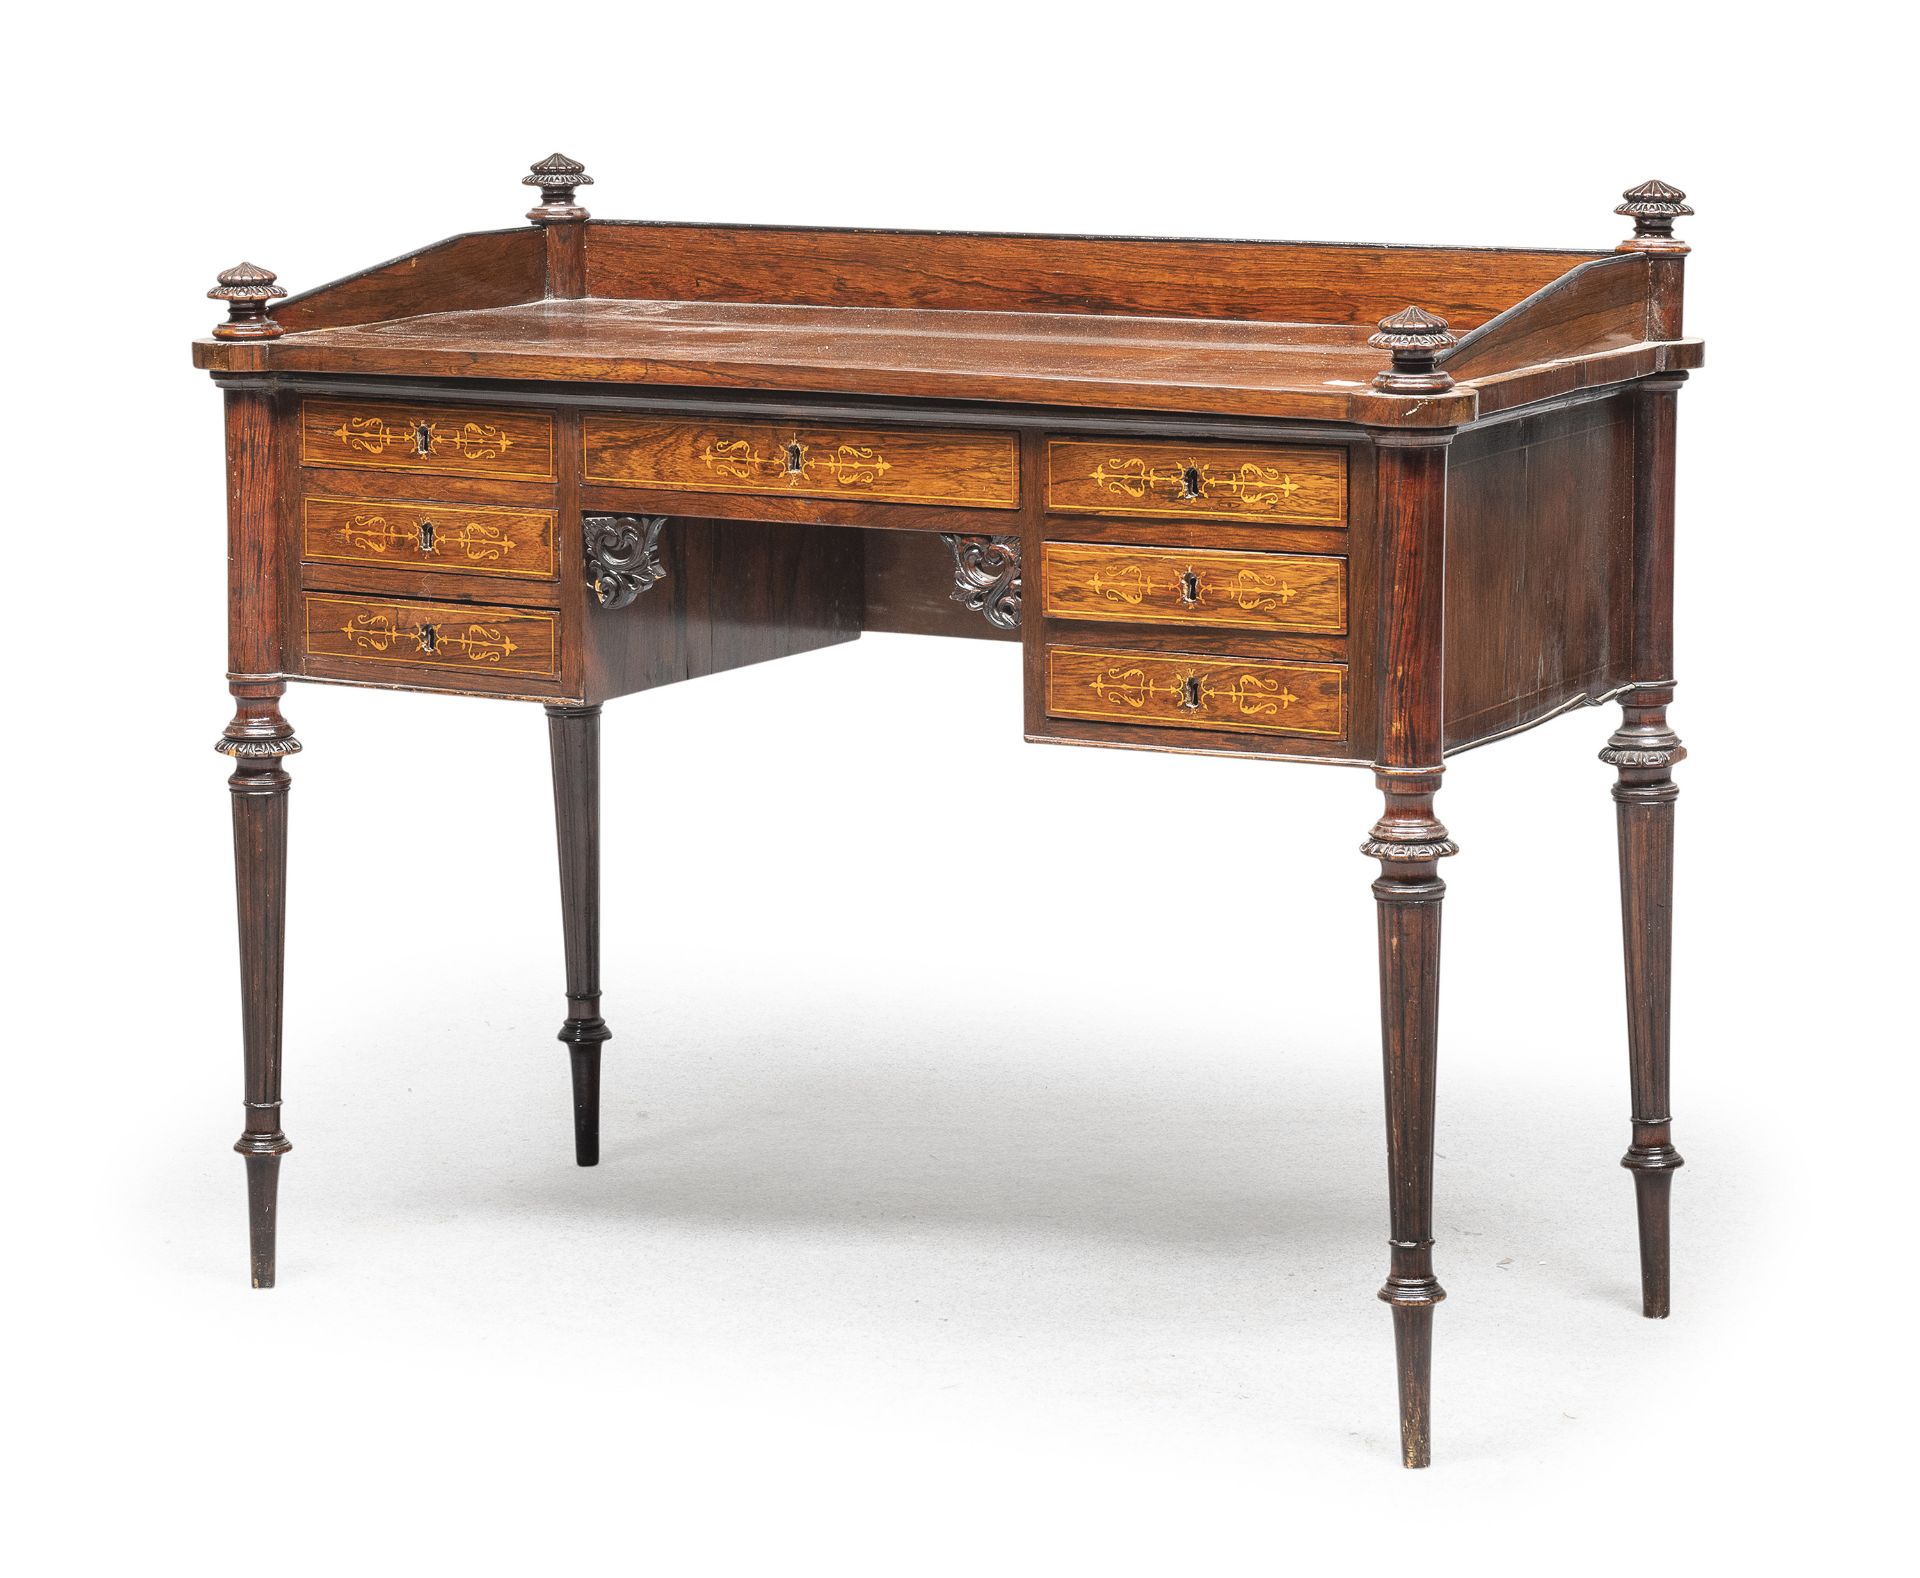 SMALL ROSEWOOD DESK 19th CENTURY